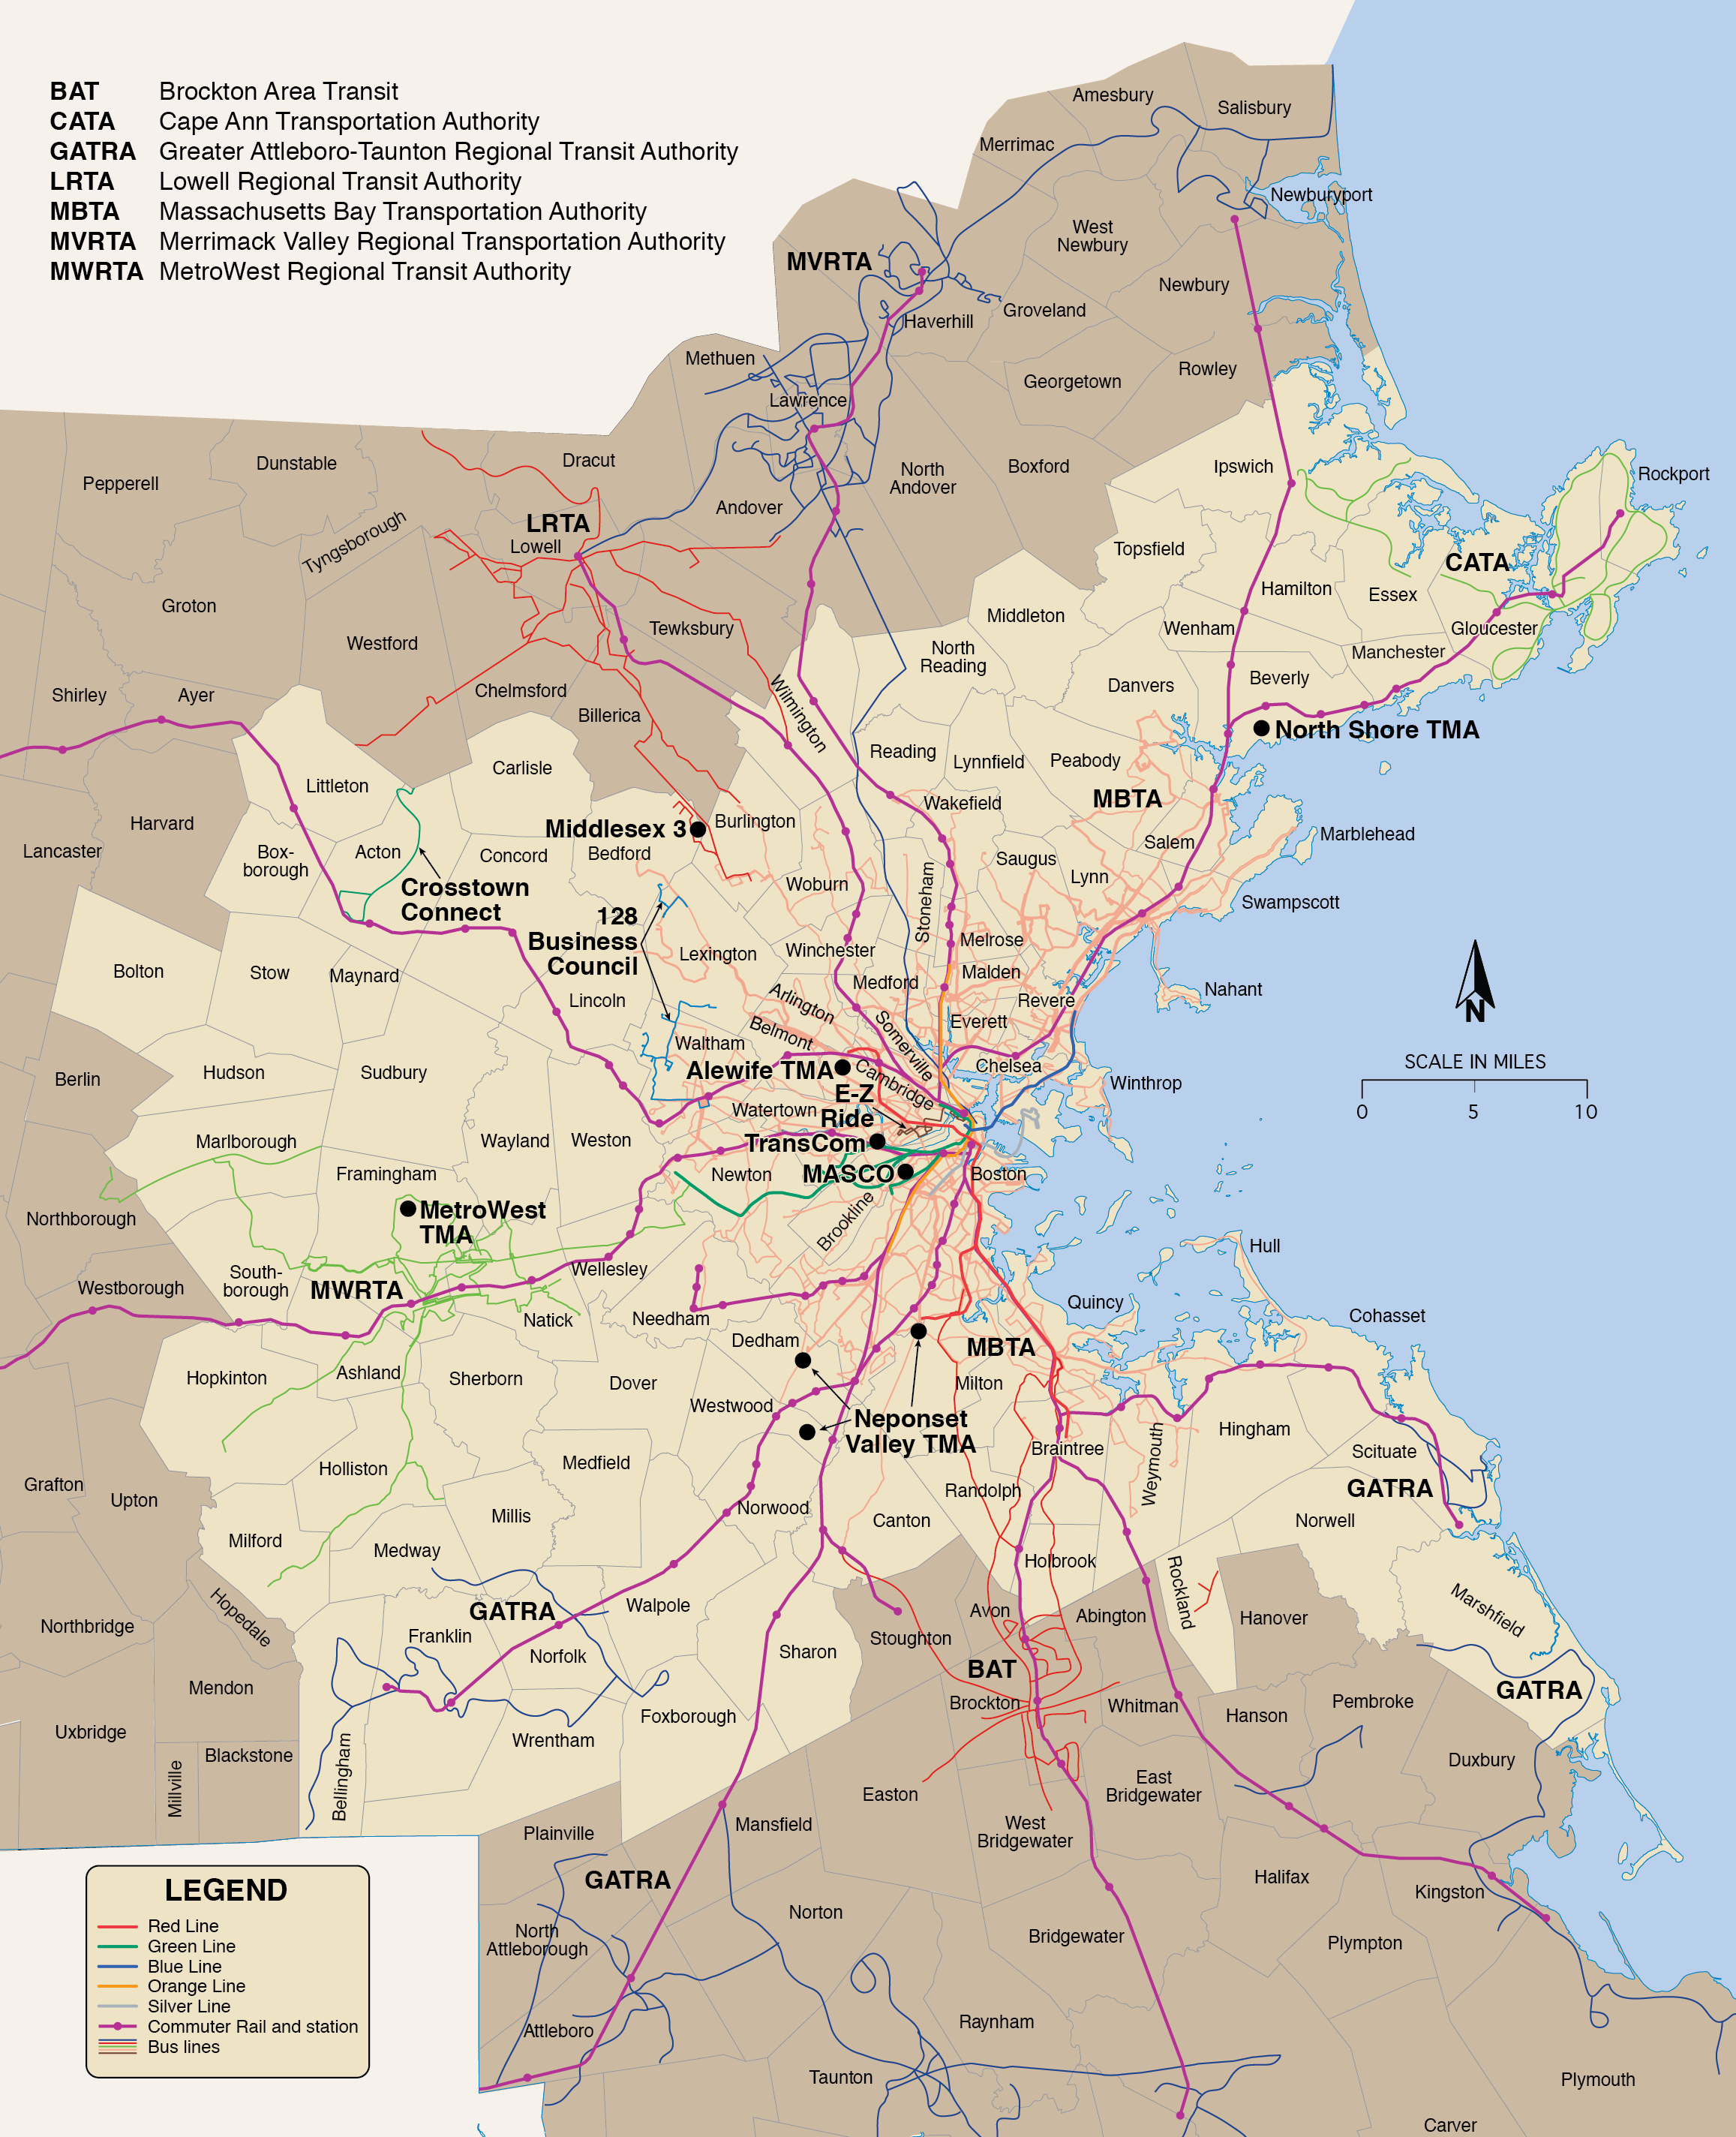 This map shows the MBTA and RTA Transit Routes operating in the Boston region.